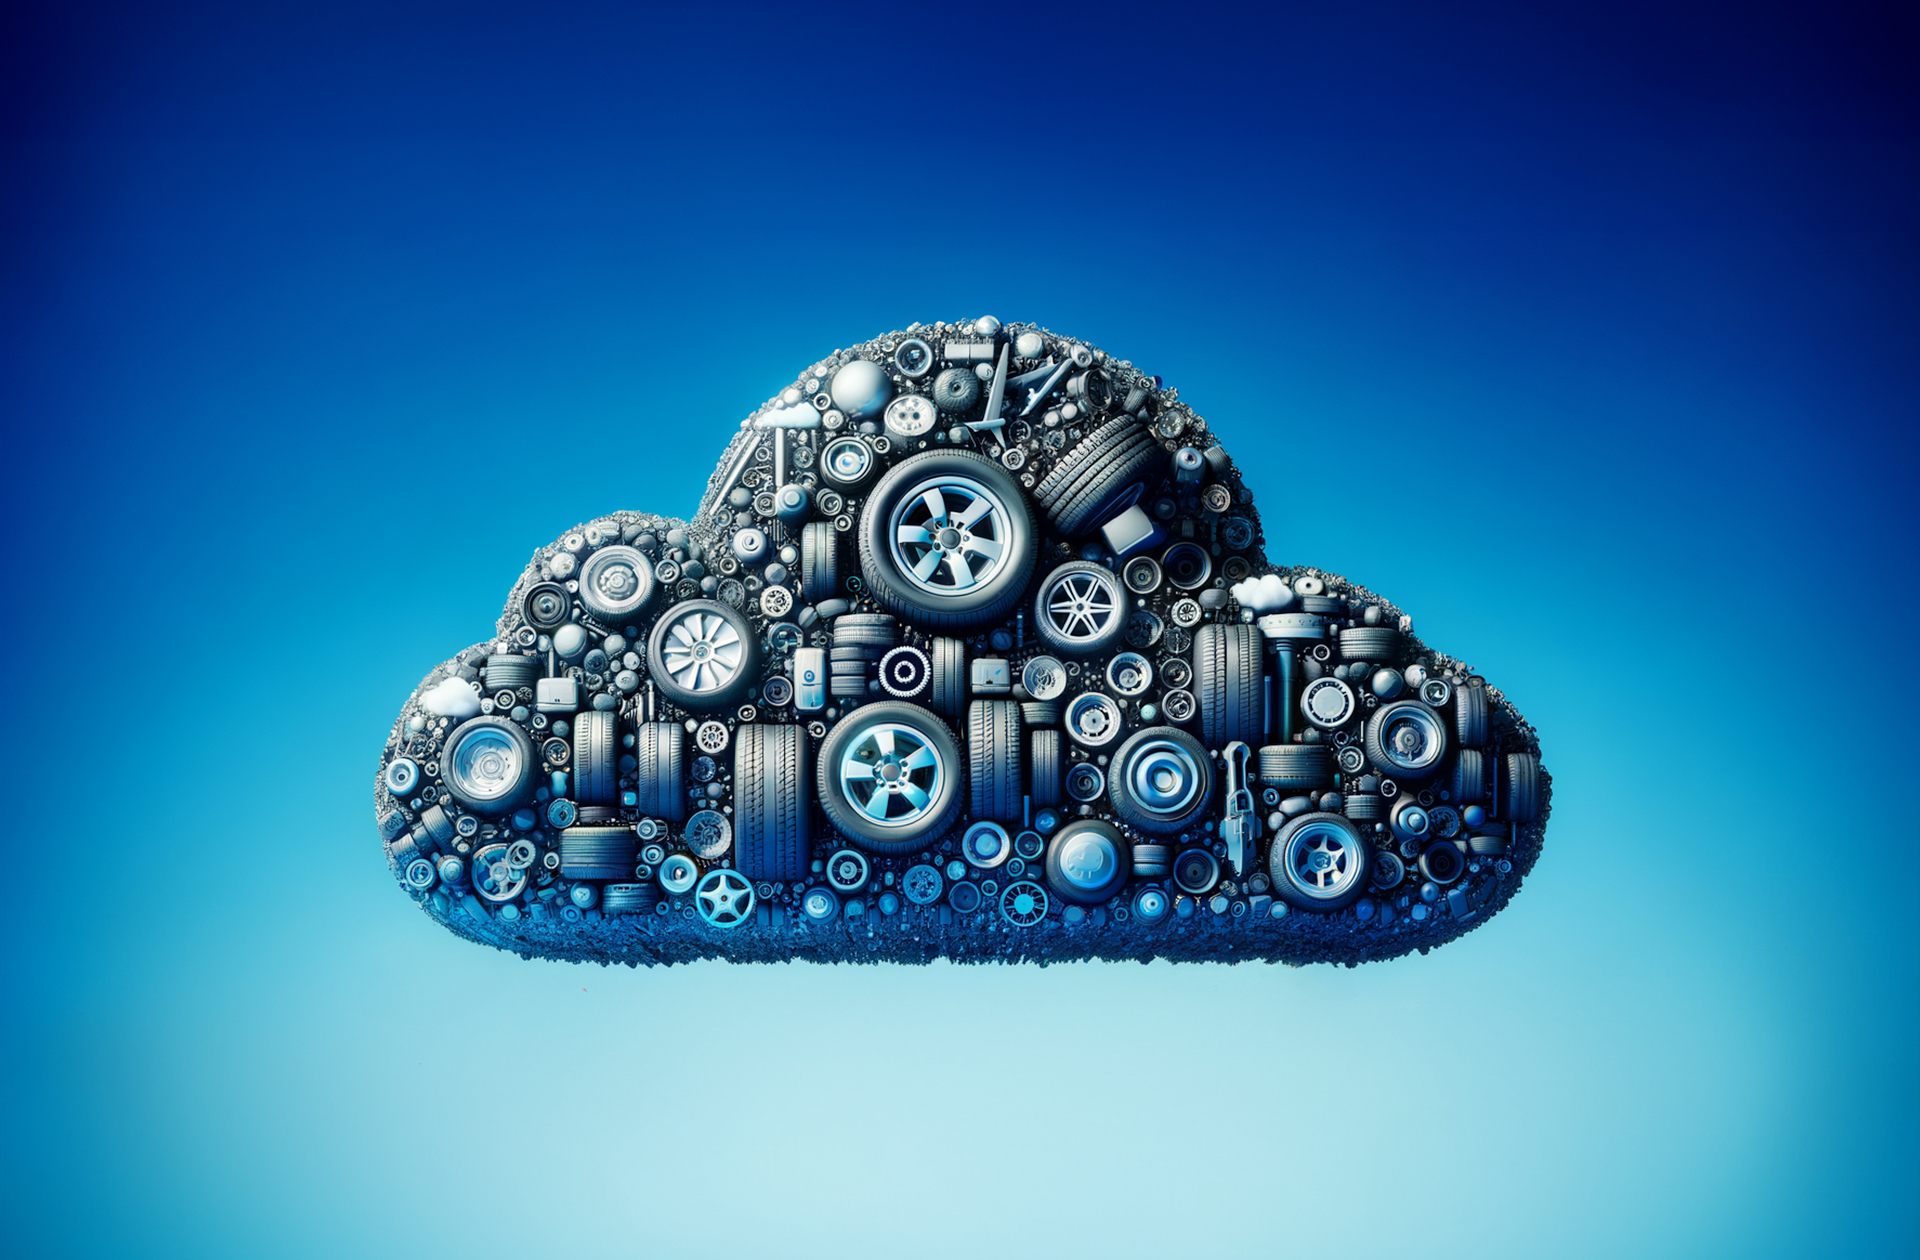 Dozens of tires in different sizes form a floating cloud icon that represents cloud computing.